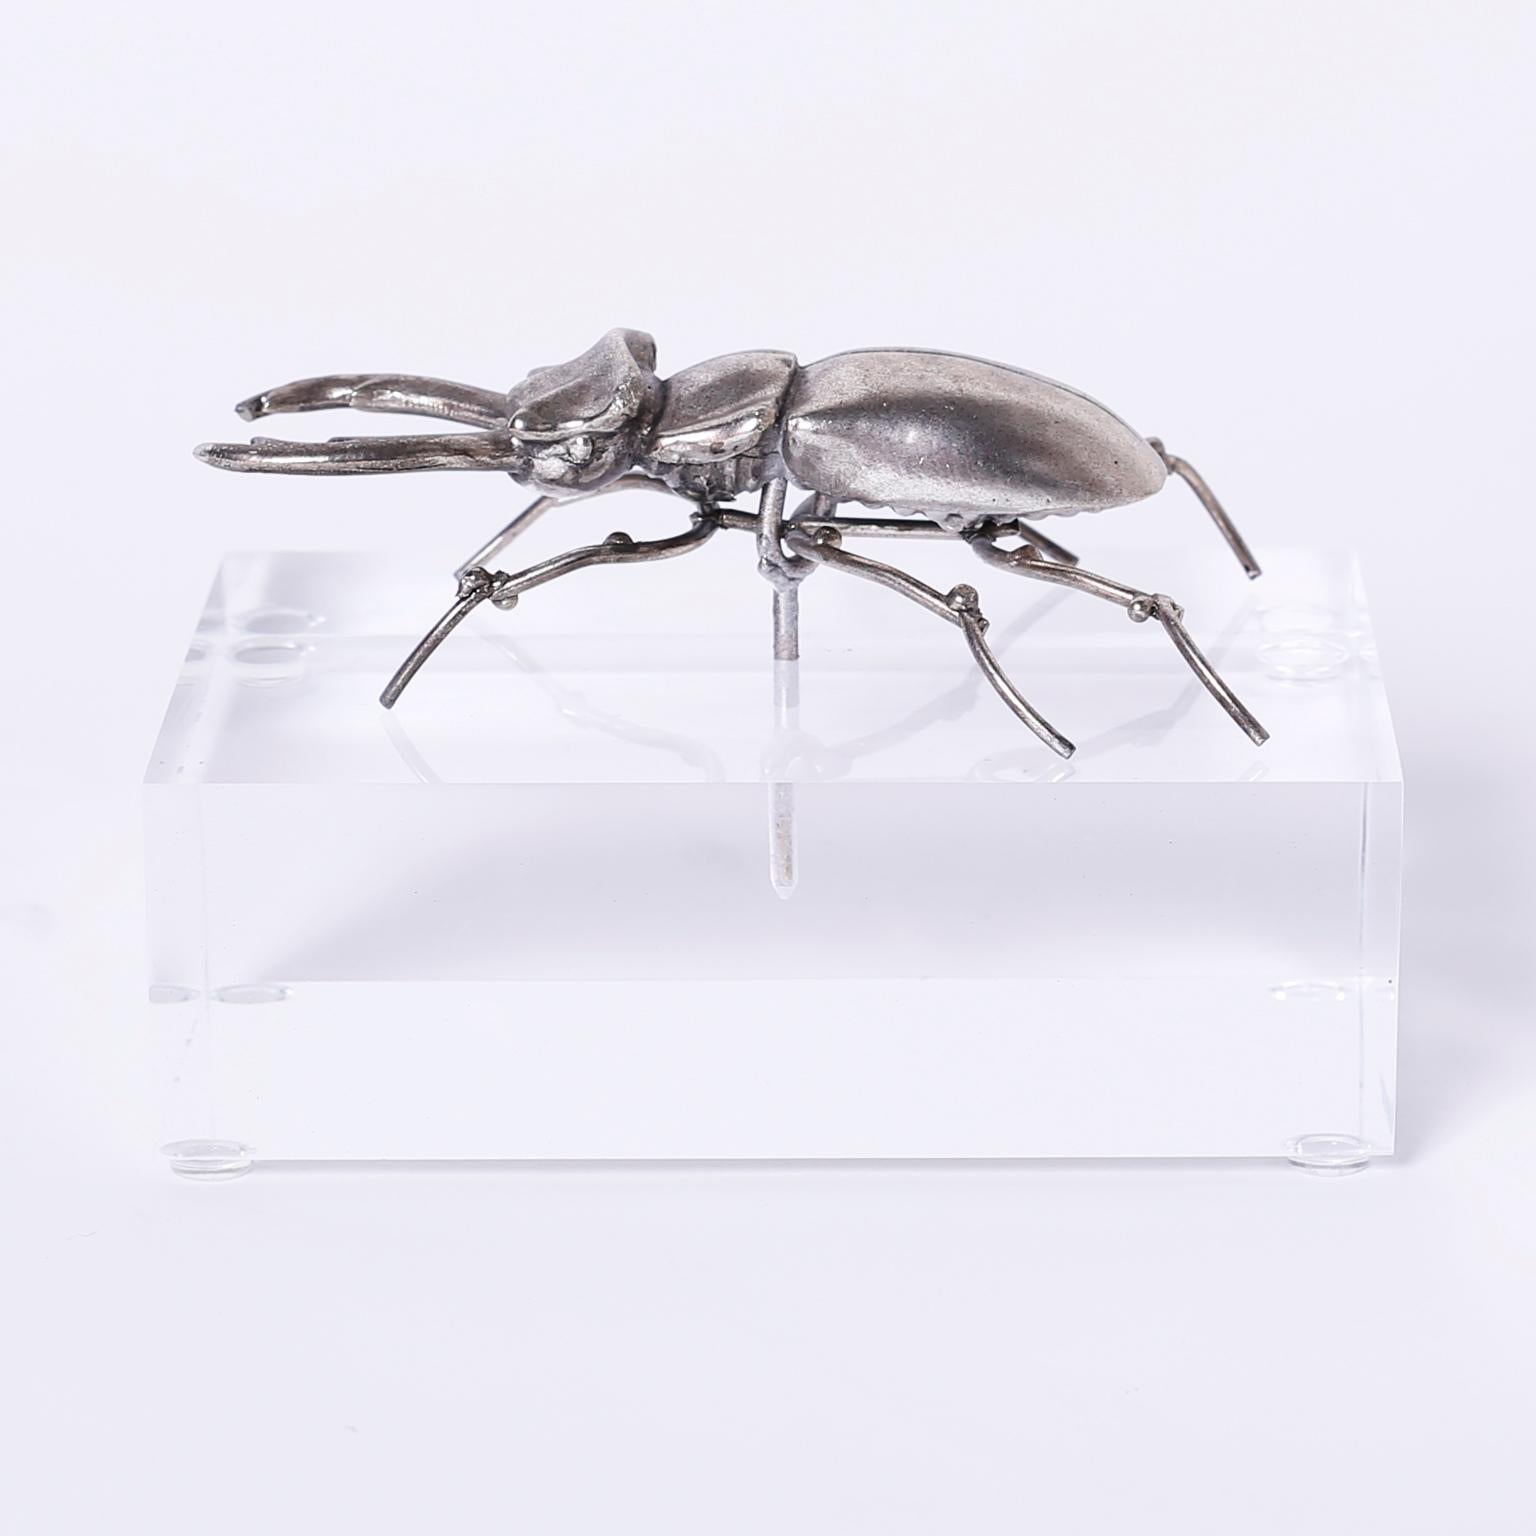 Two insect sculpture of a beetle and a grasshopper crafted in silver plate over brass with ambitious detail and presented on Lucite bases. Priced Individually.

Dimensions: 
Left: H 4, W 6, D 4 
center  SOLD 
right: H 5 W 8, D 4 